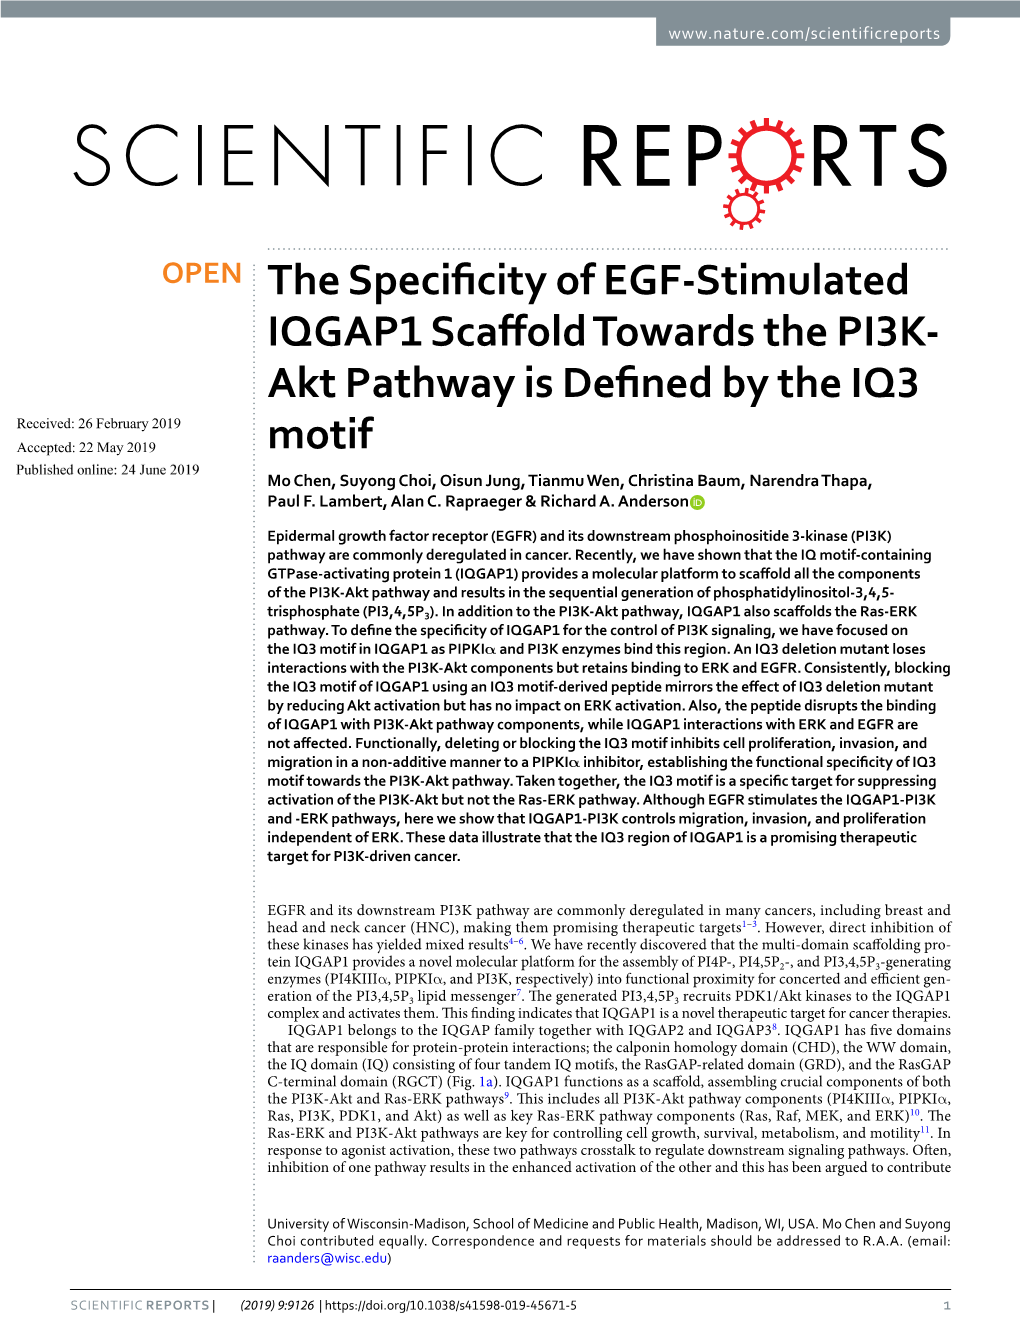 The Specificity of EGF-Stimulated IQGAP1 Scaffold Towards the PI3K-Akt Pathway Is Defined by the IQ3 Motif